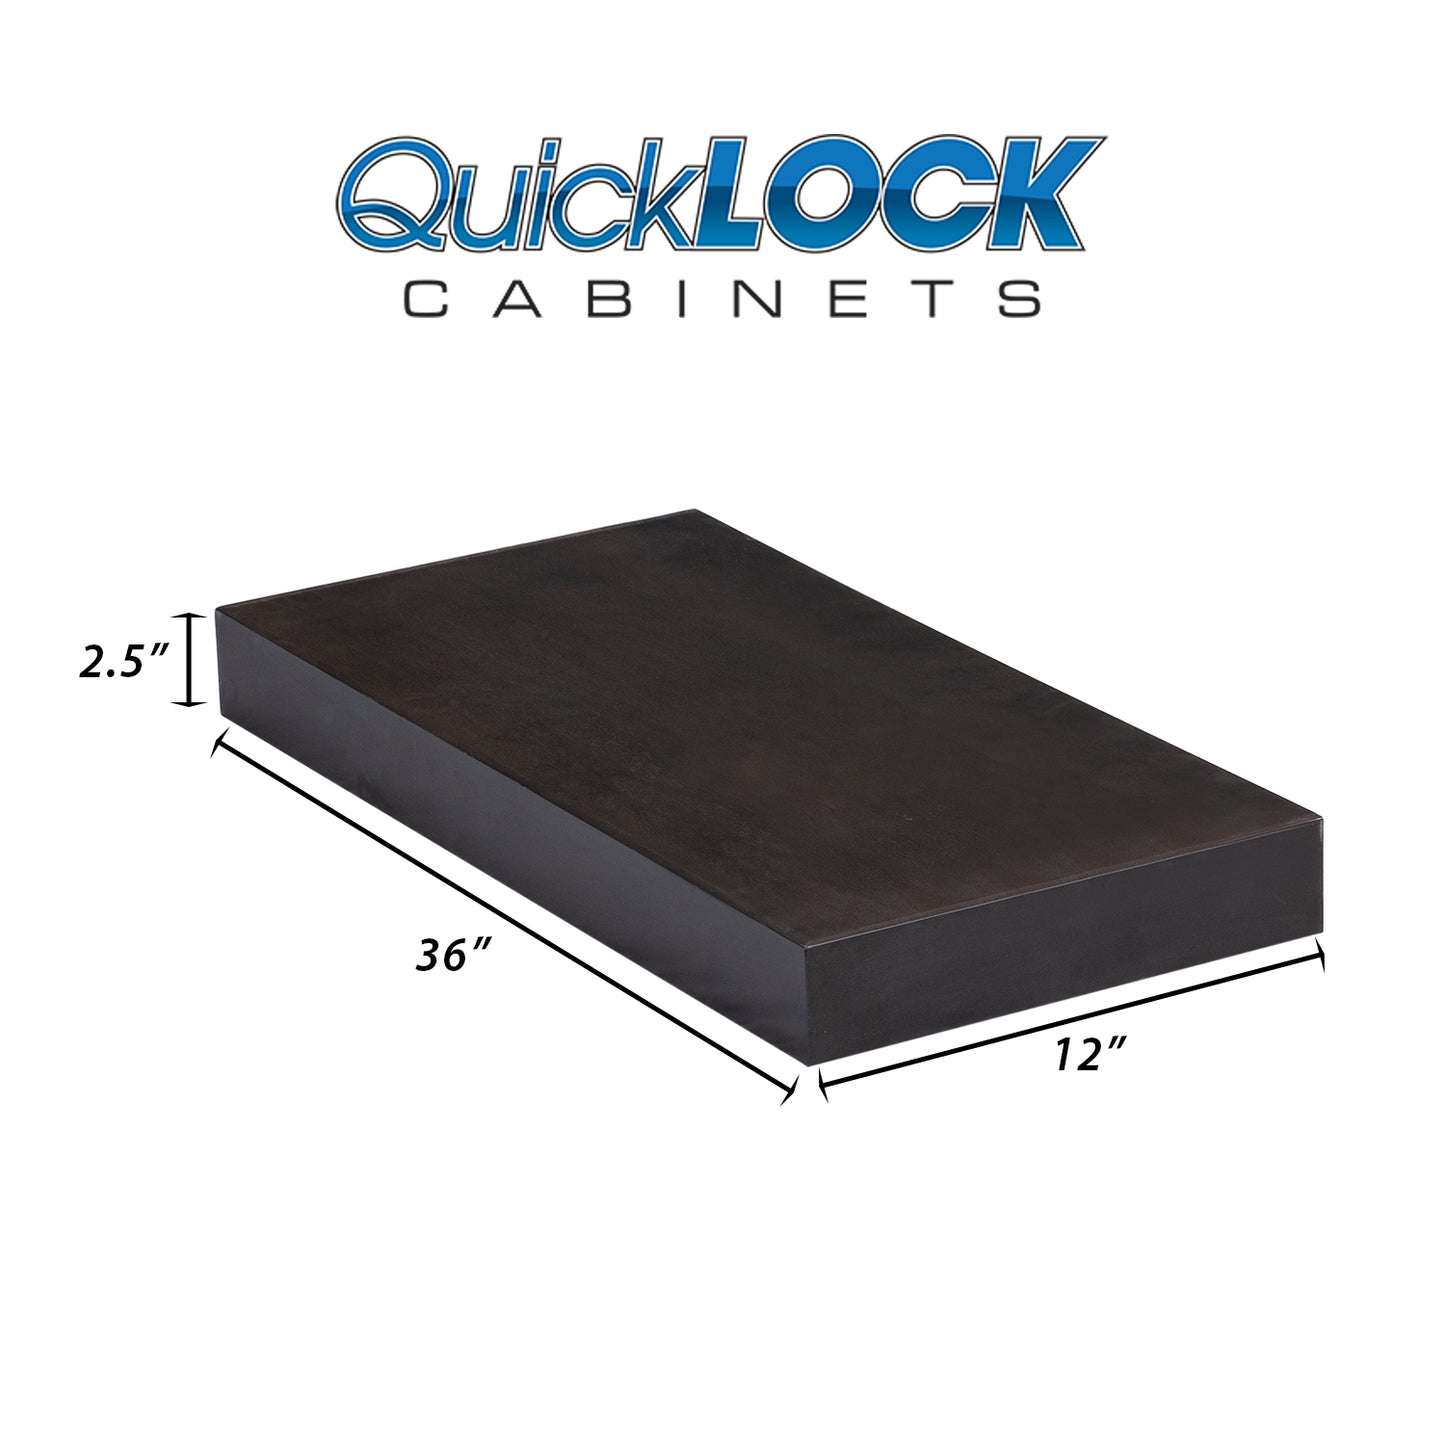 Quicklock Cabinets Floating Shelves | 2.5" Thick | Espresso Stain, 12" D x 36" W x 2.5" H | American Made | Hardwood Bracket | Complete Shelf Unit